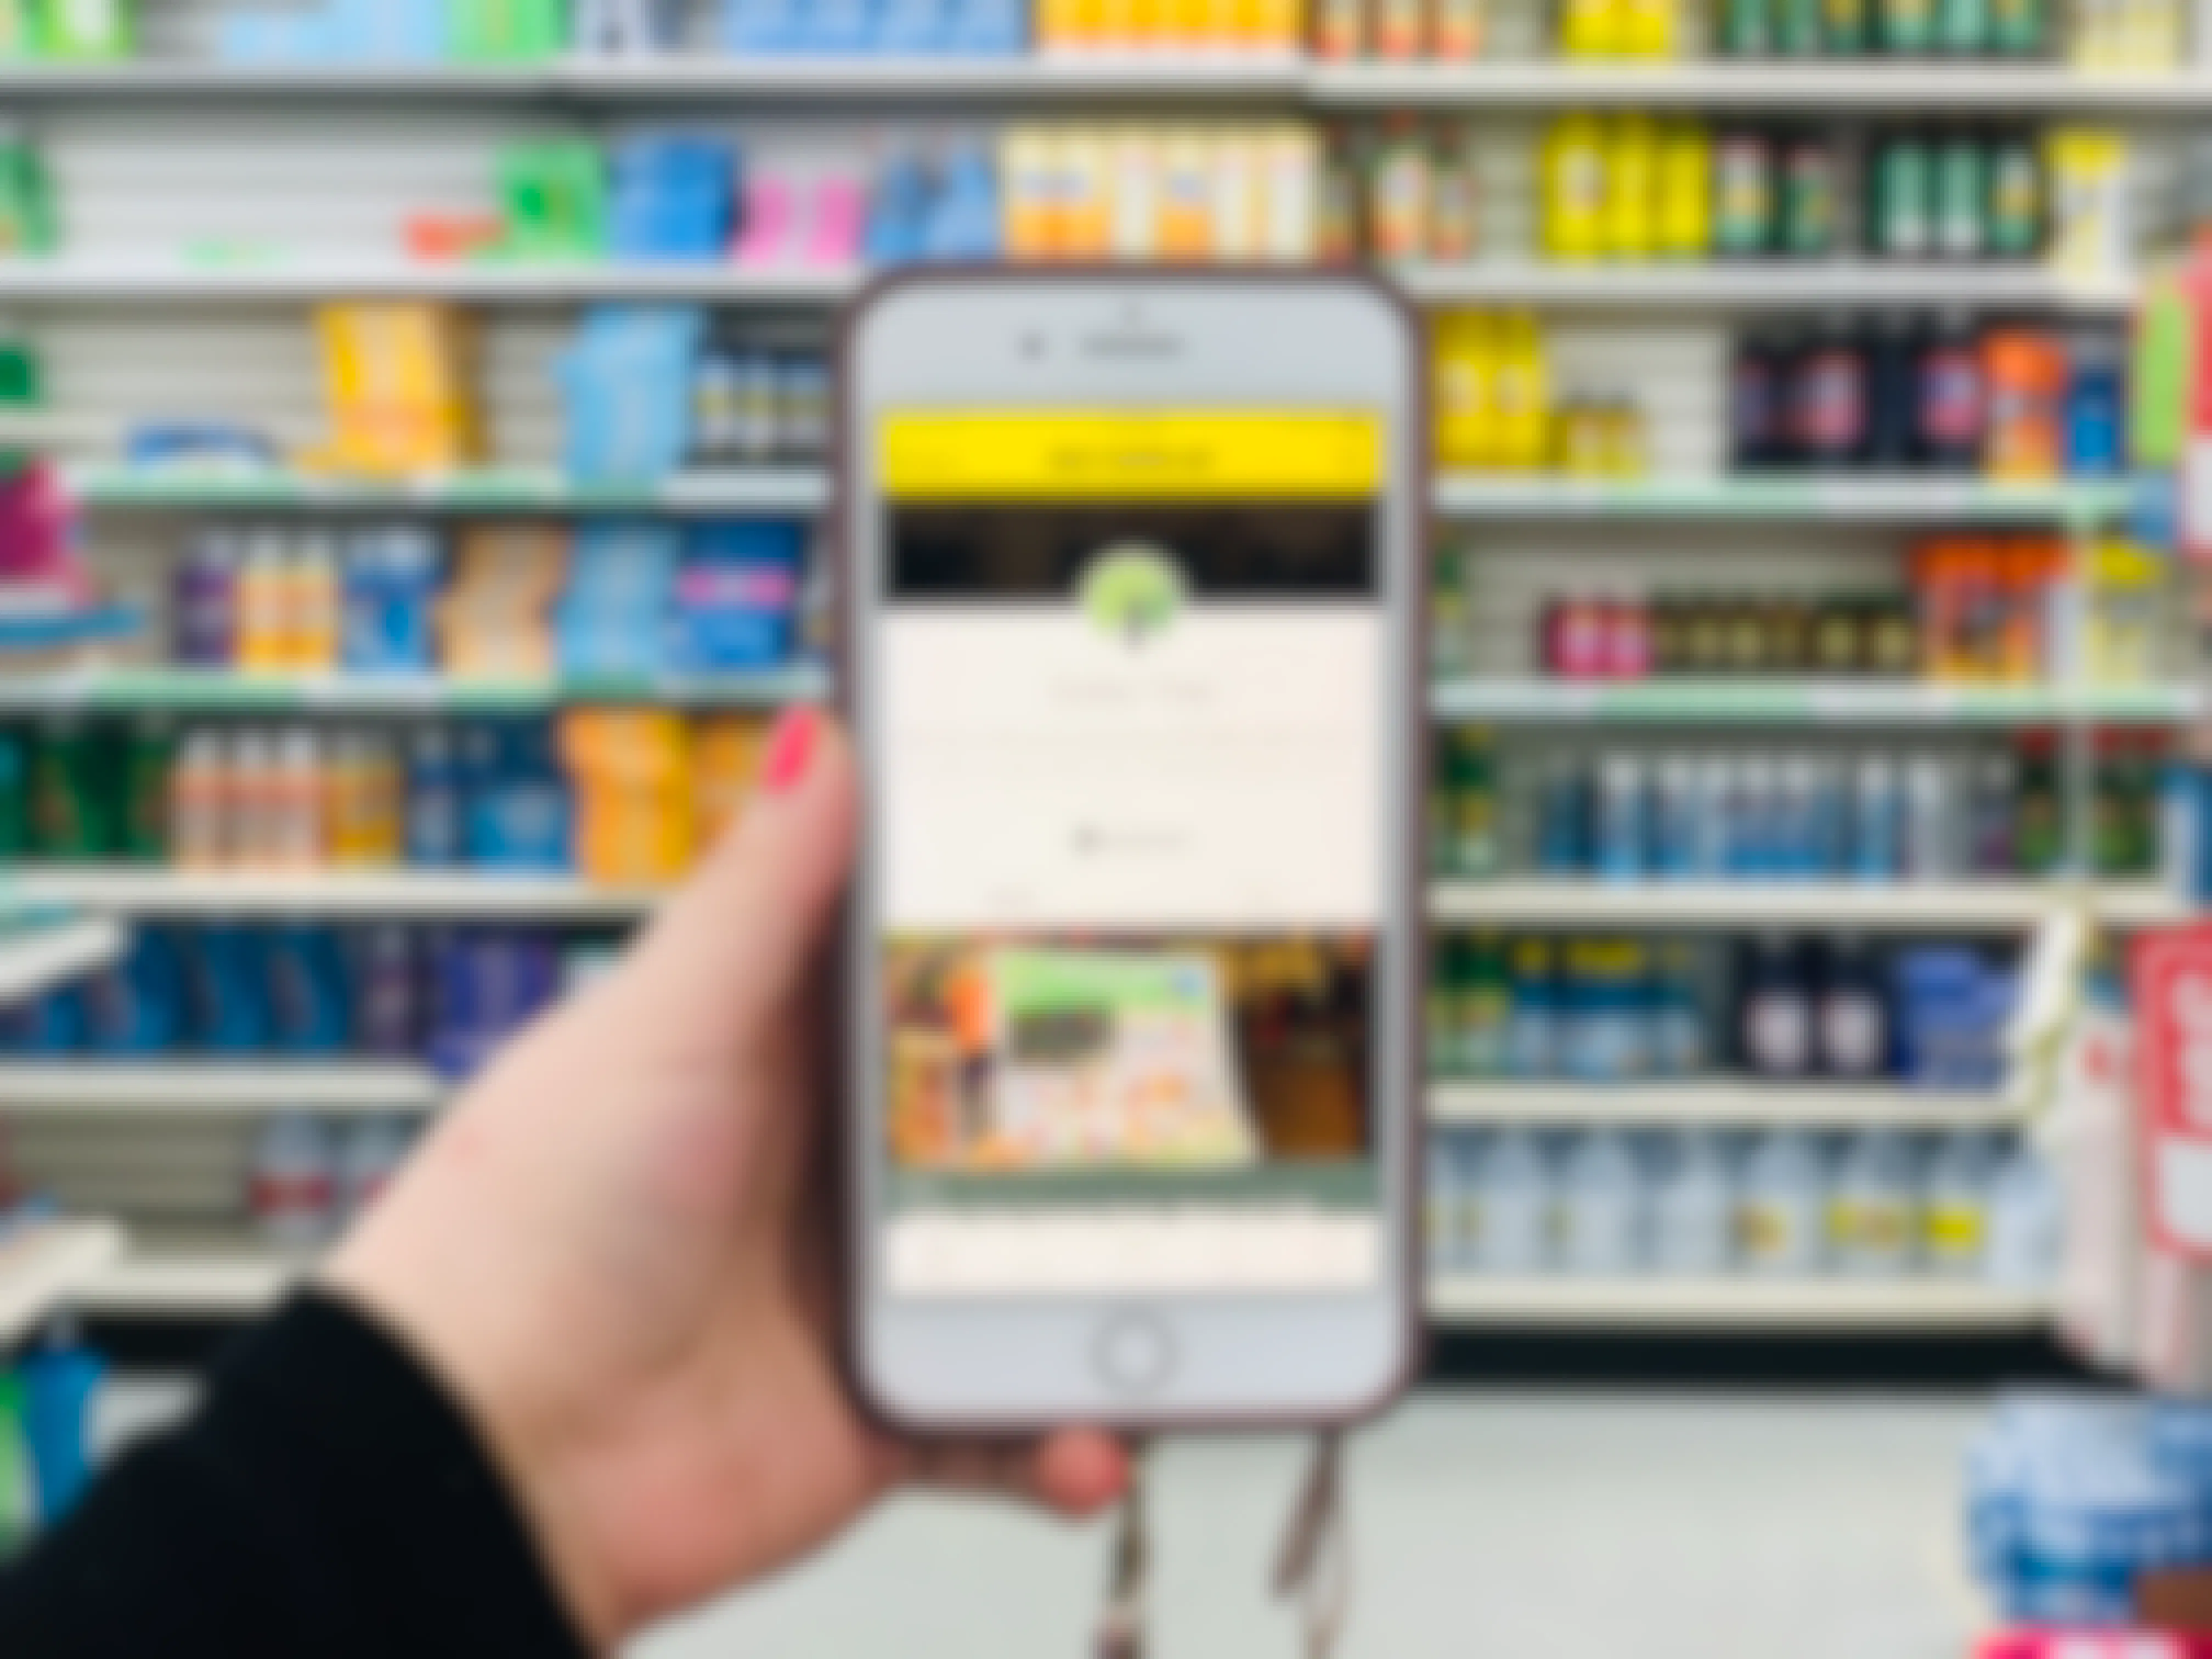 The Krazy Coupon Lady app: Apps You Should Use at Dollar Tree to Get Free Stuff